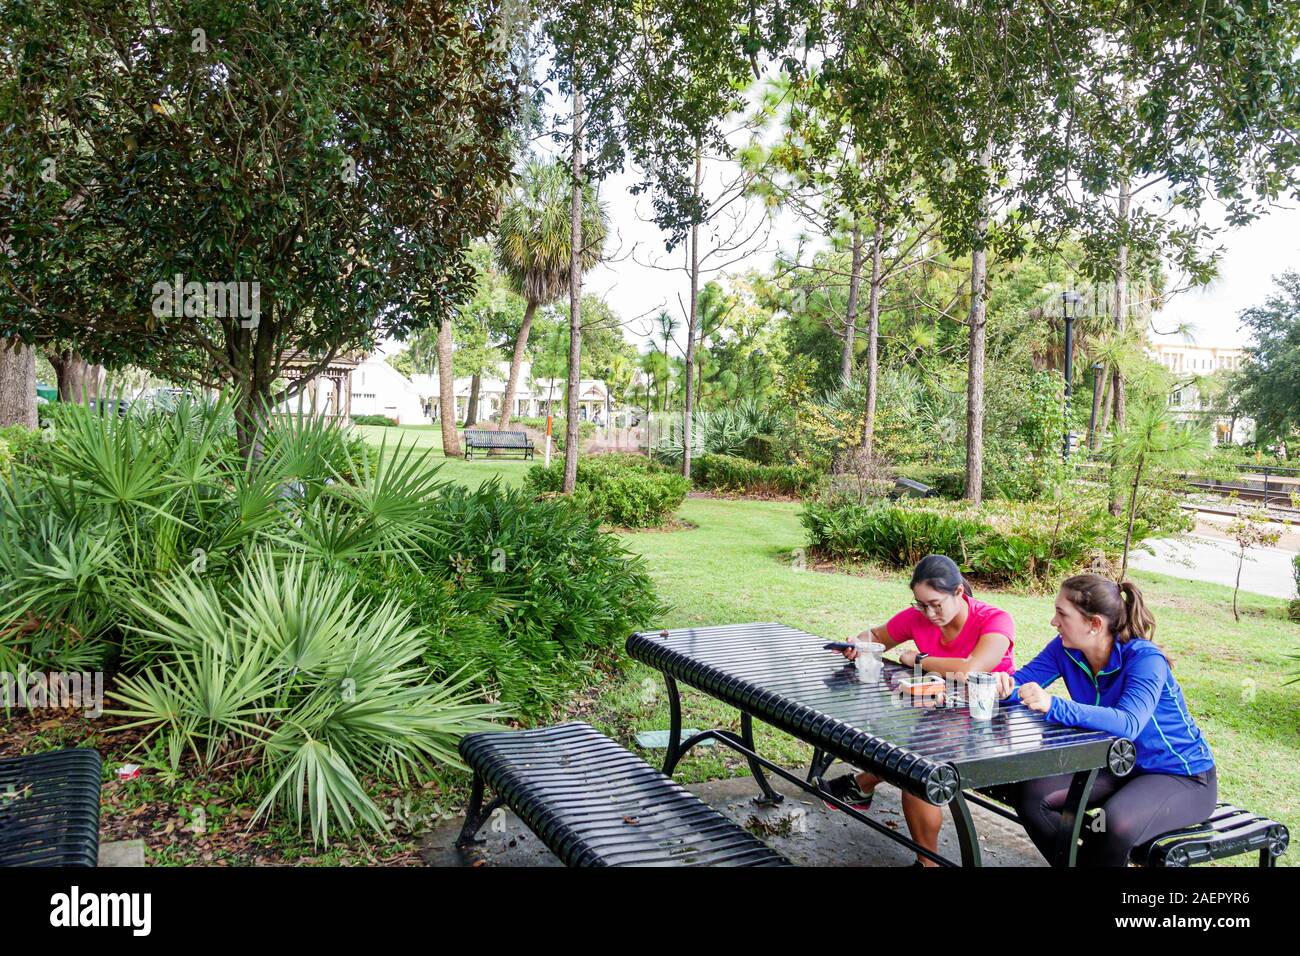 Orlando Winter Park Florida,Downtown,historic district,Central Park,public urban green space,picnic bench,Asian Asians ethnic immigrant immigrants min Stock Photo